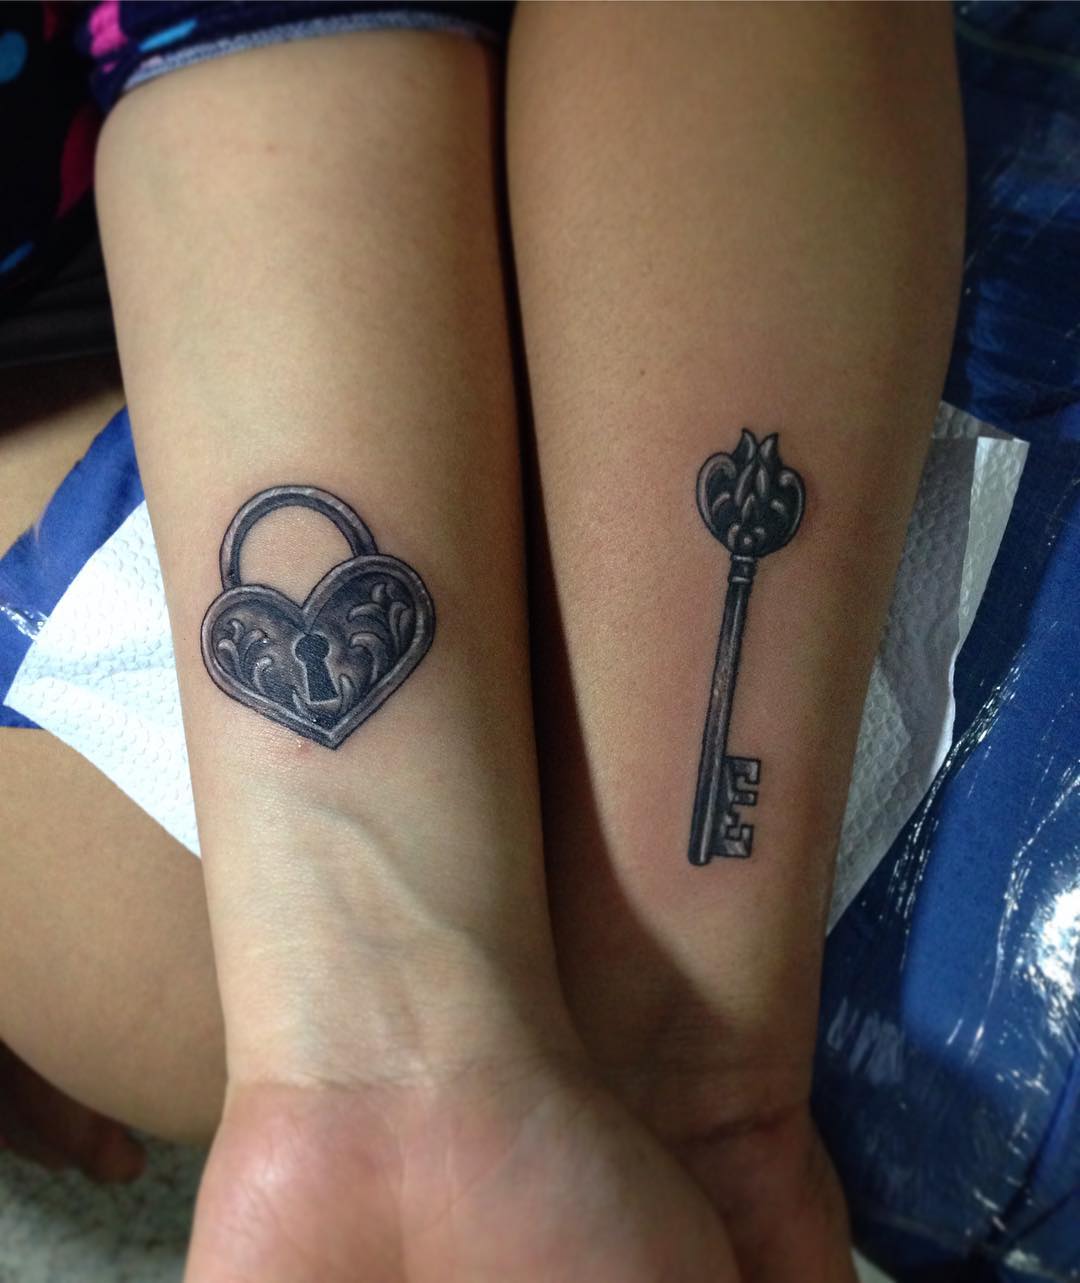 85+ Best Lock and Key Tattoos Designs & Meanings 2019